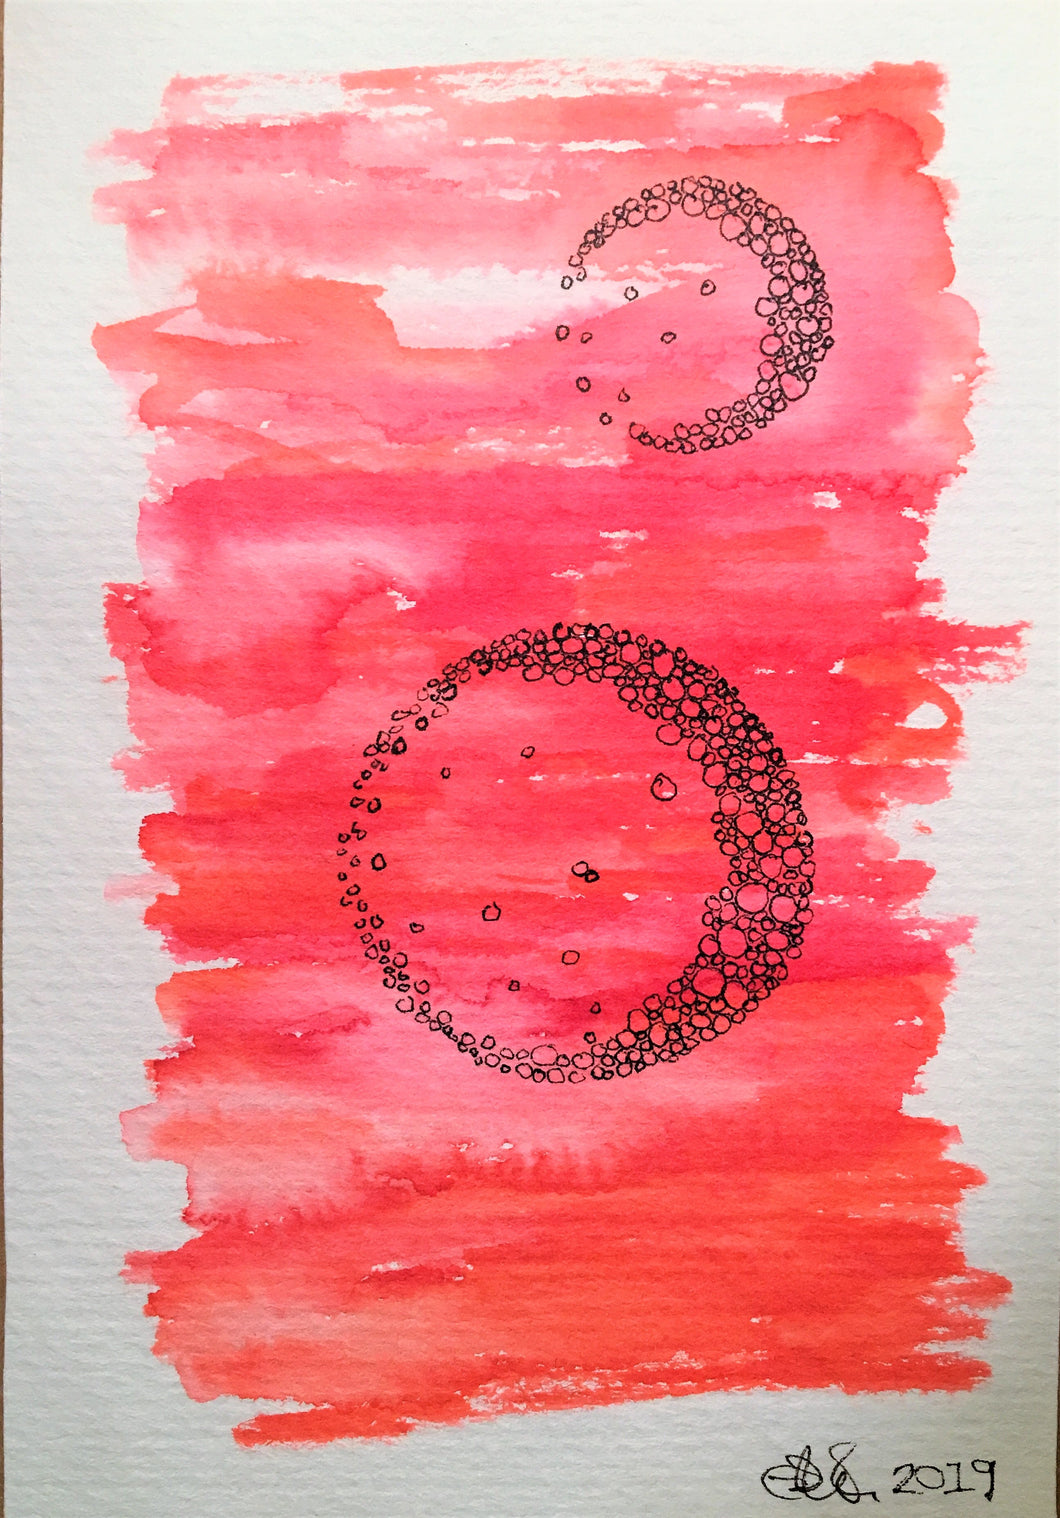 Handpainted Watercolour Greeting Card - Abstract Red/Pink background with Ink Circle/Bubble Design - eDgE dEsiGn London